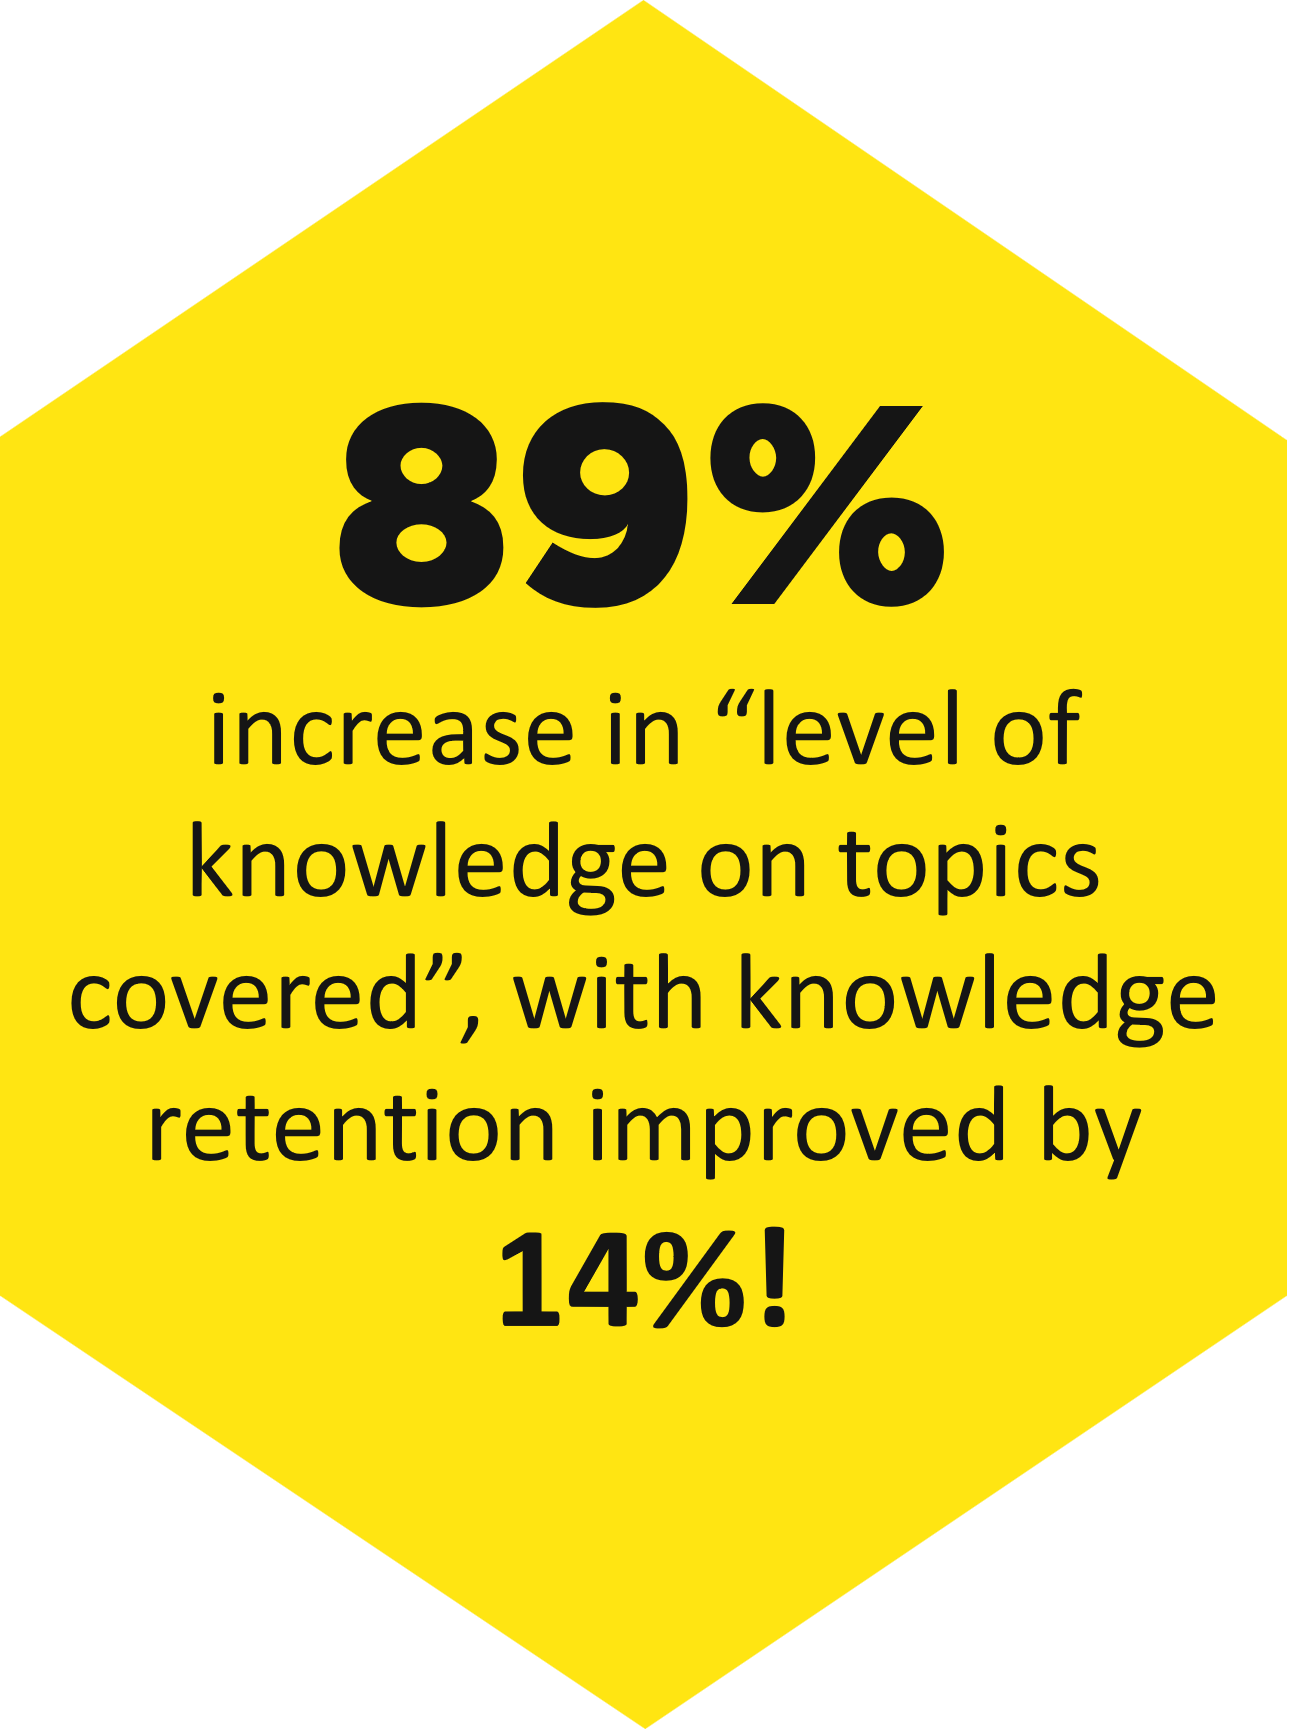 Text reads: 89% increase in “level of knowledge on topics covered”, with knowledge retention improved by 14%!